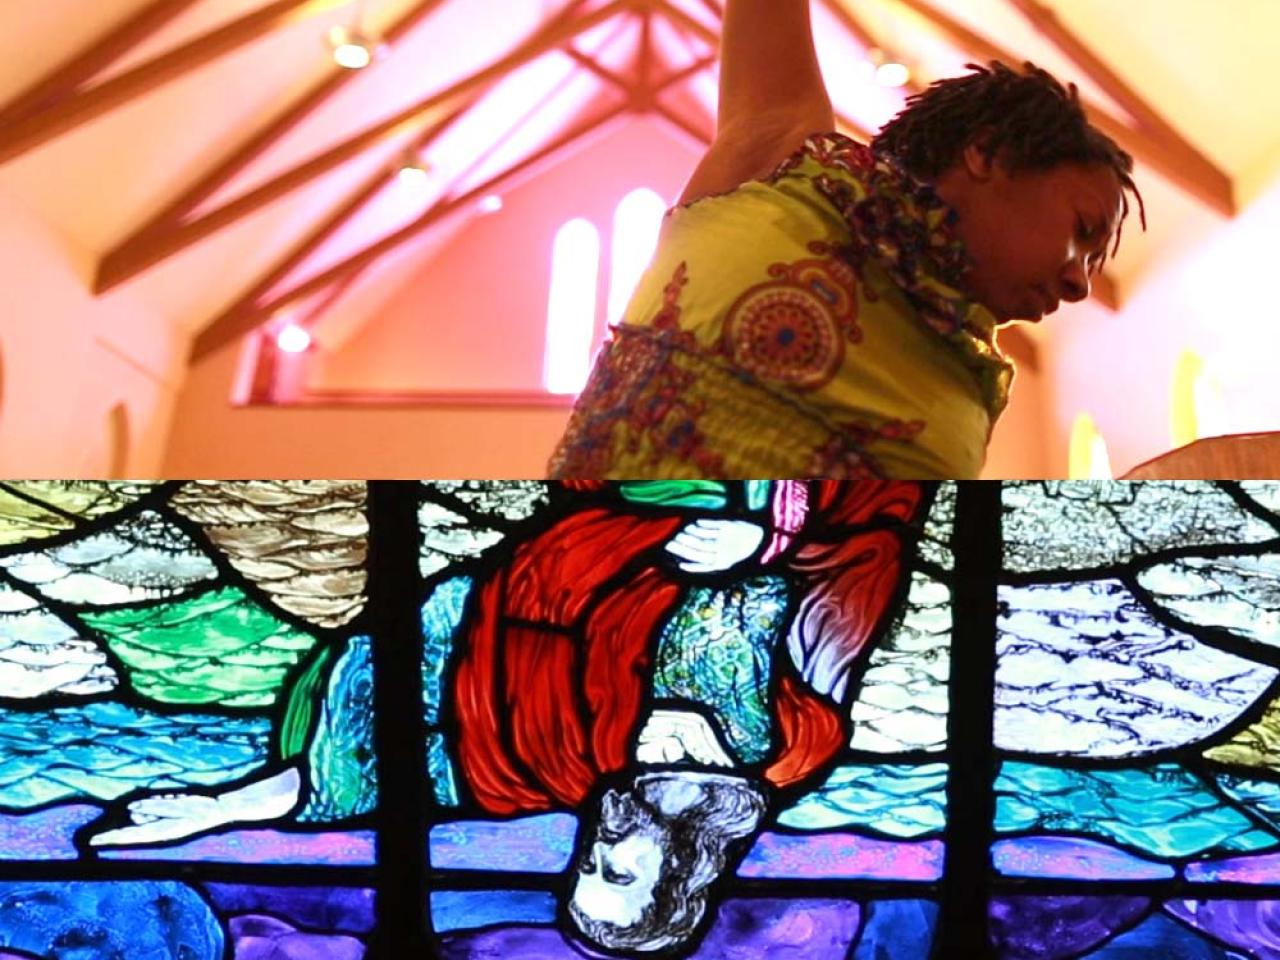 A split image where the top half is a black person from the ribcage up with their arm in the air reaching toward the beams of a vaulted ceiling. The bottom half is an upside down stained glass image of a white Jesus with a red garment against a blue and purple background.